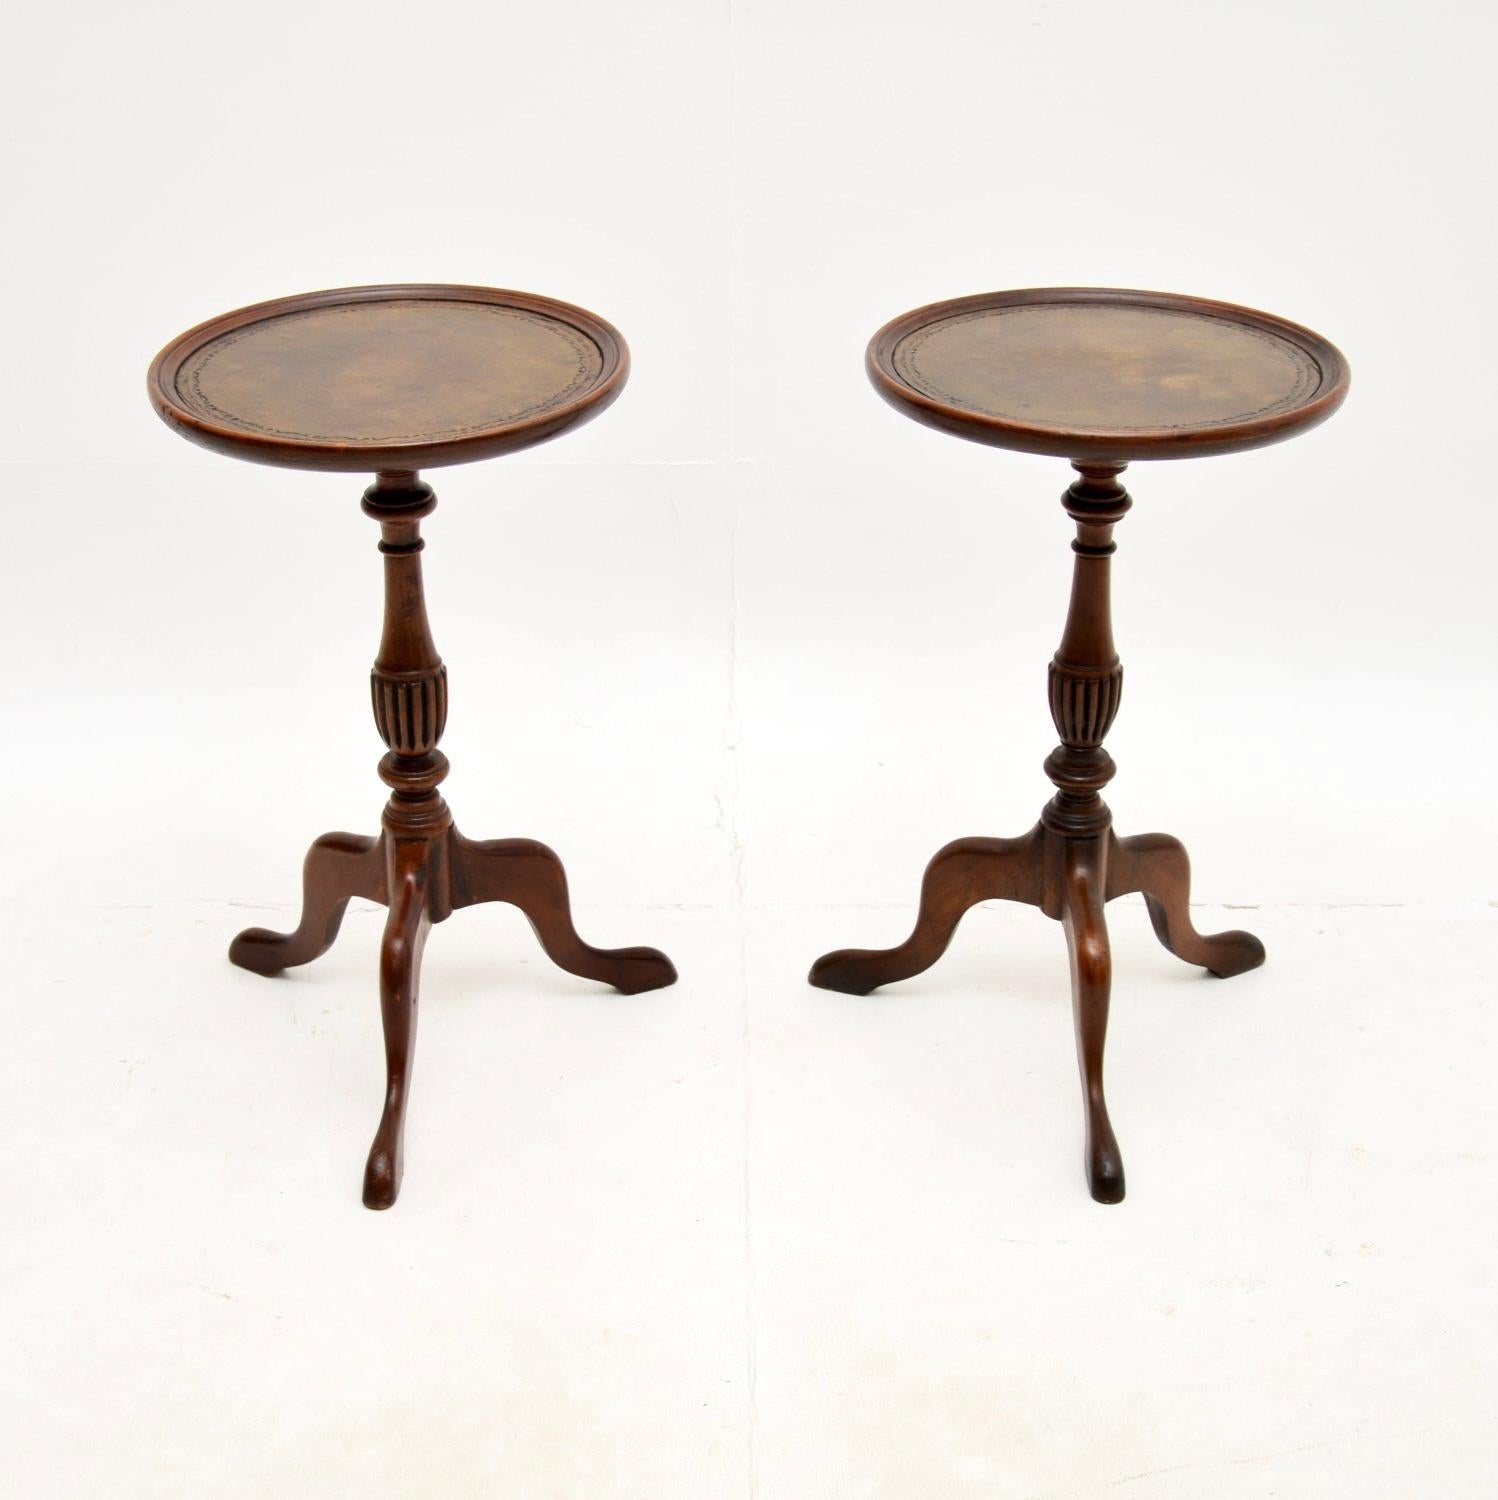 A smart and very useful pair of antique leather top wine tables. They were made in England, they date from around the 1950’s.

They are extremely well made, the quality is superb. The frames are beautifully turned, sitting on tripod bases with inset